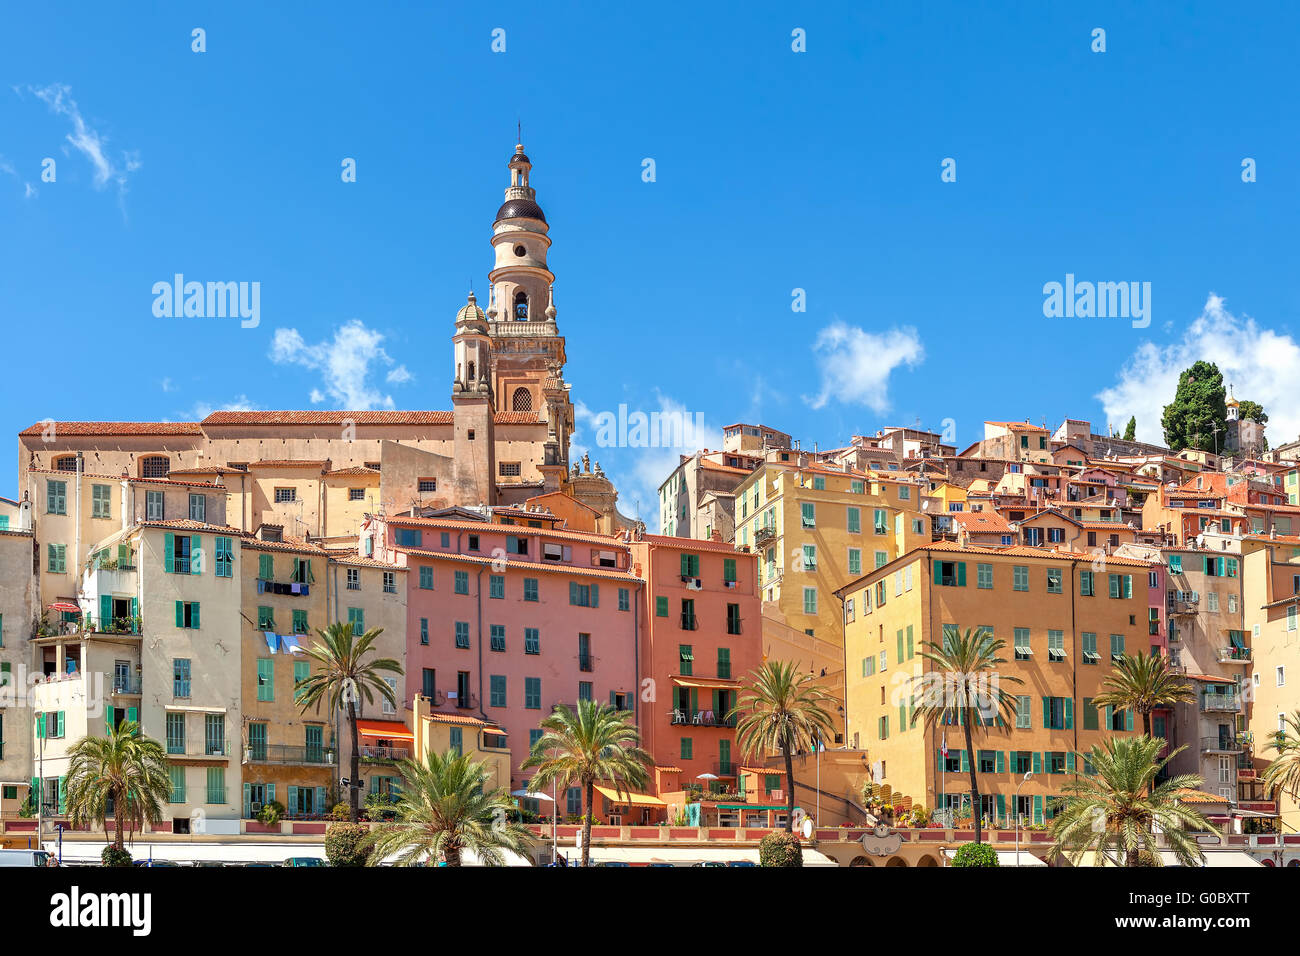 Belfry among colorful houses under blue sky in old town of Menton, France. Stock Photo